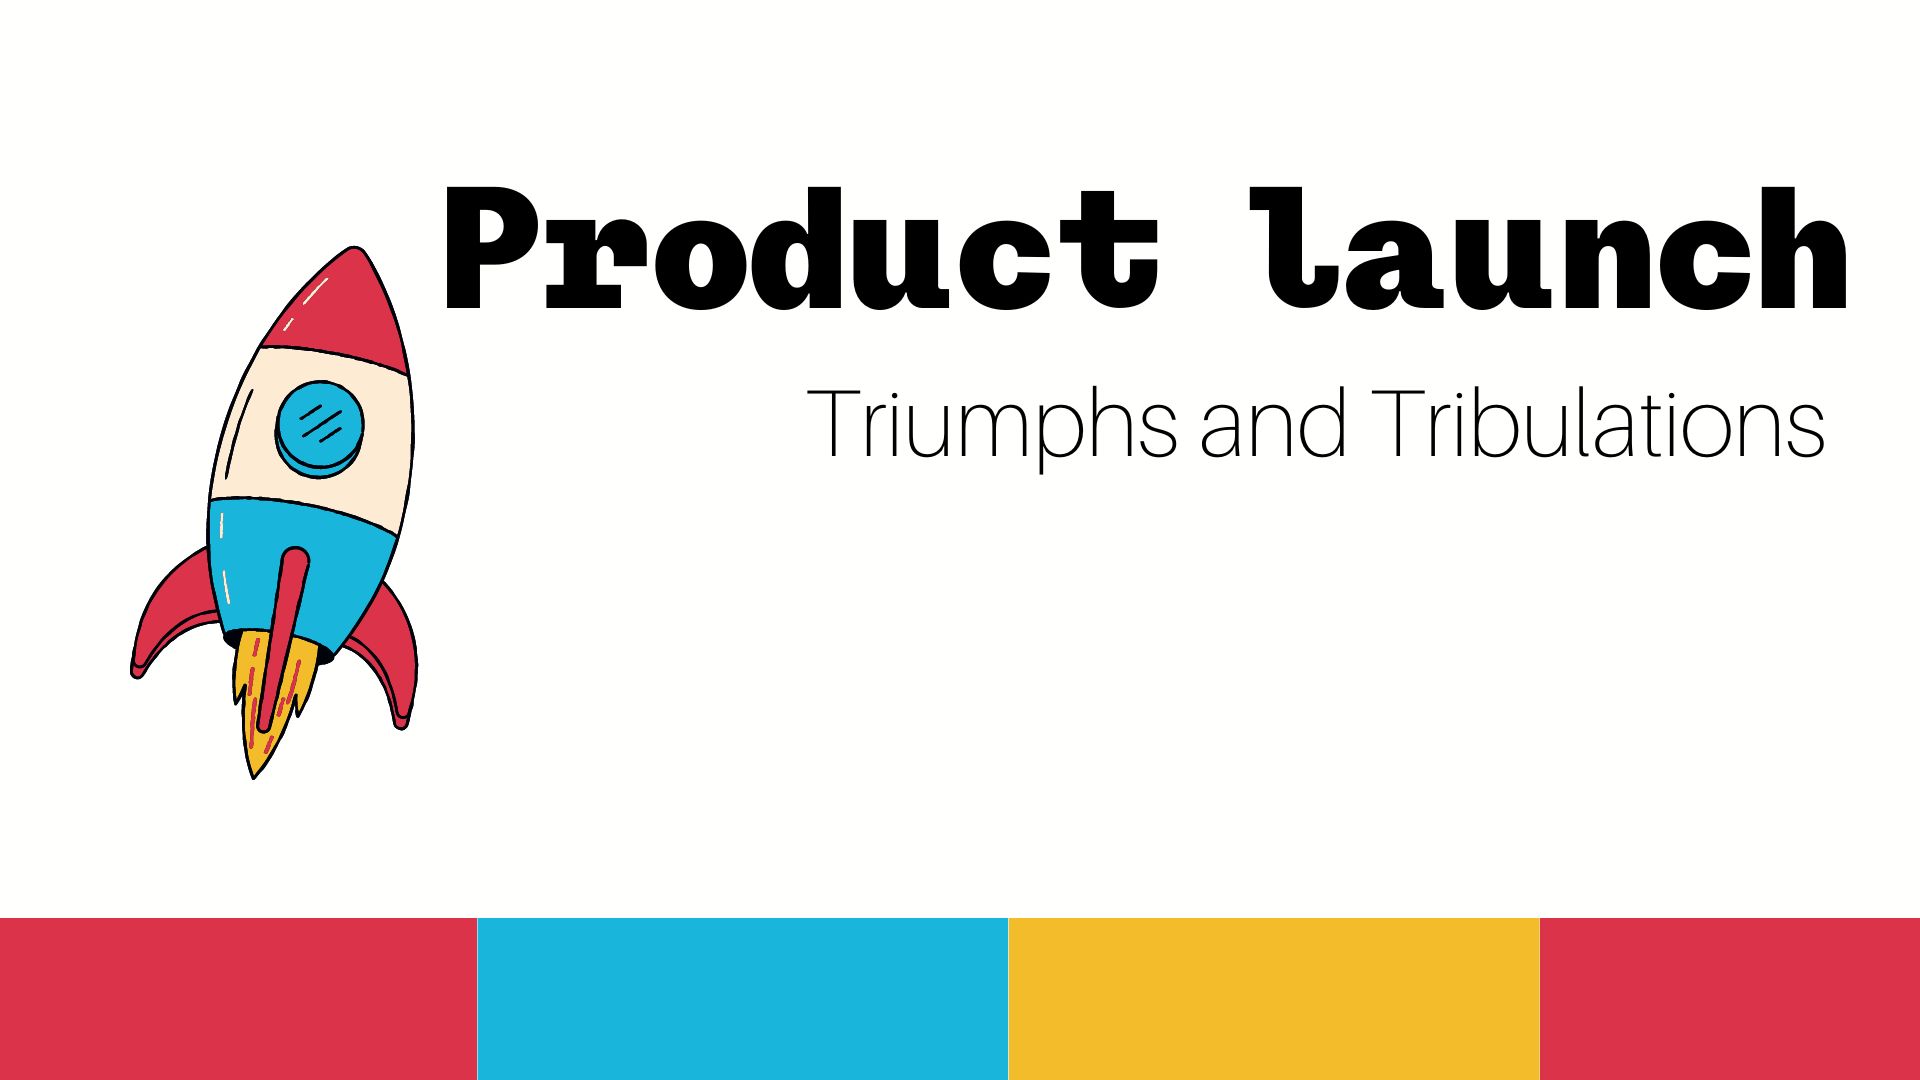 Product launch - Triumphs and Tribulations